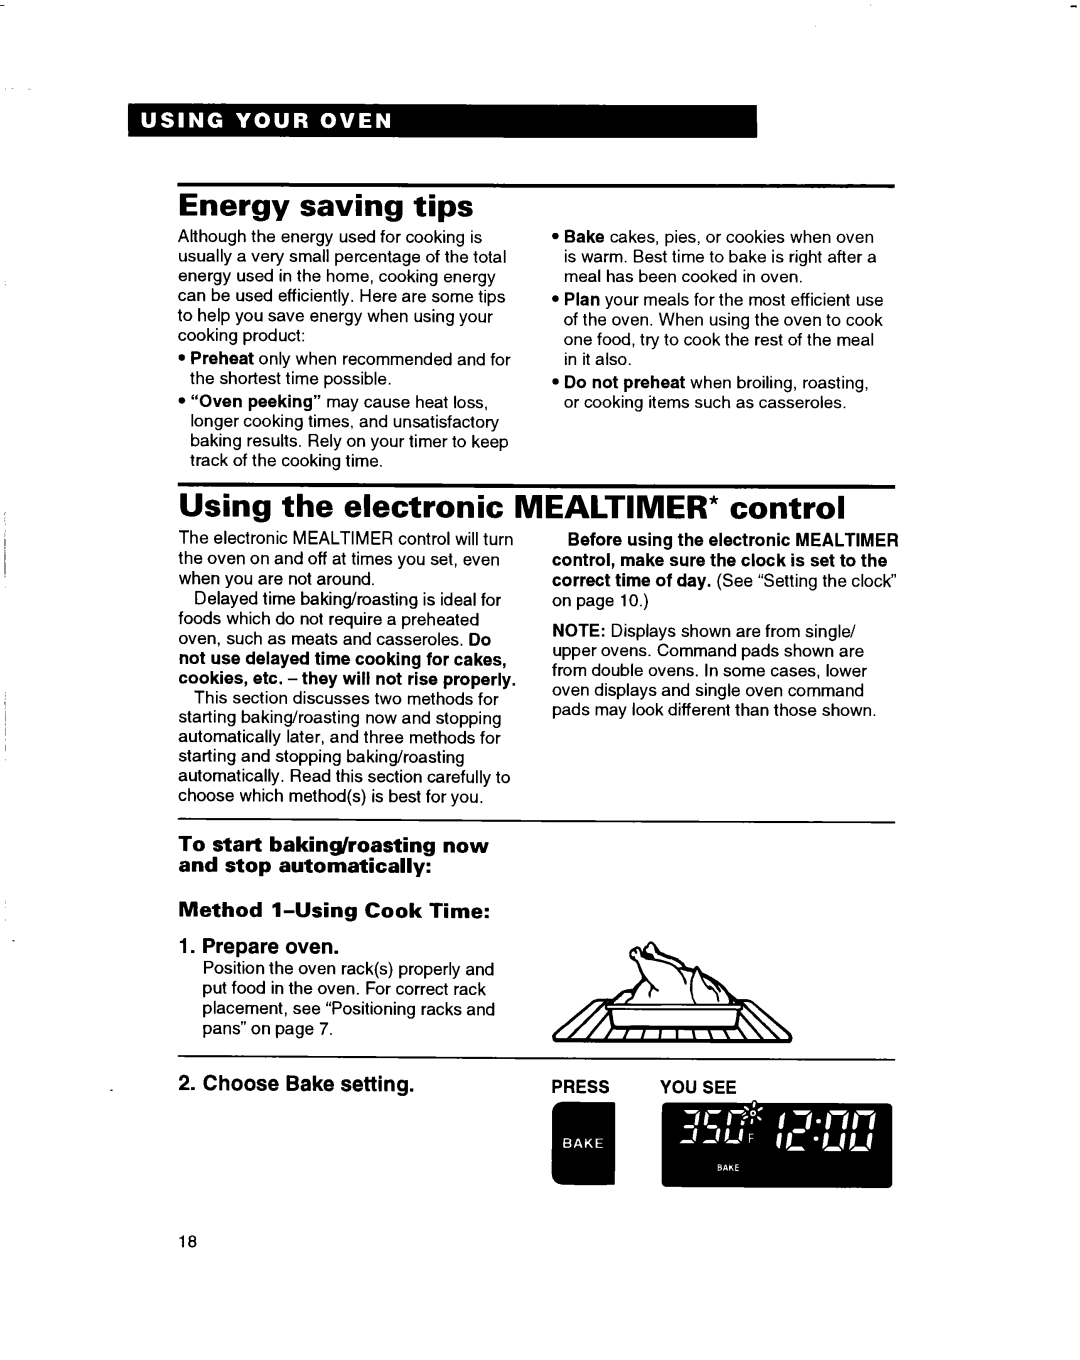 Whirlpool RBD276PD warranty Energy saving tips, Using the electronic MEALTIMER* control, Prepare oven, Choose Bake setting 